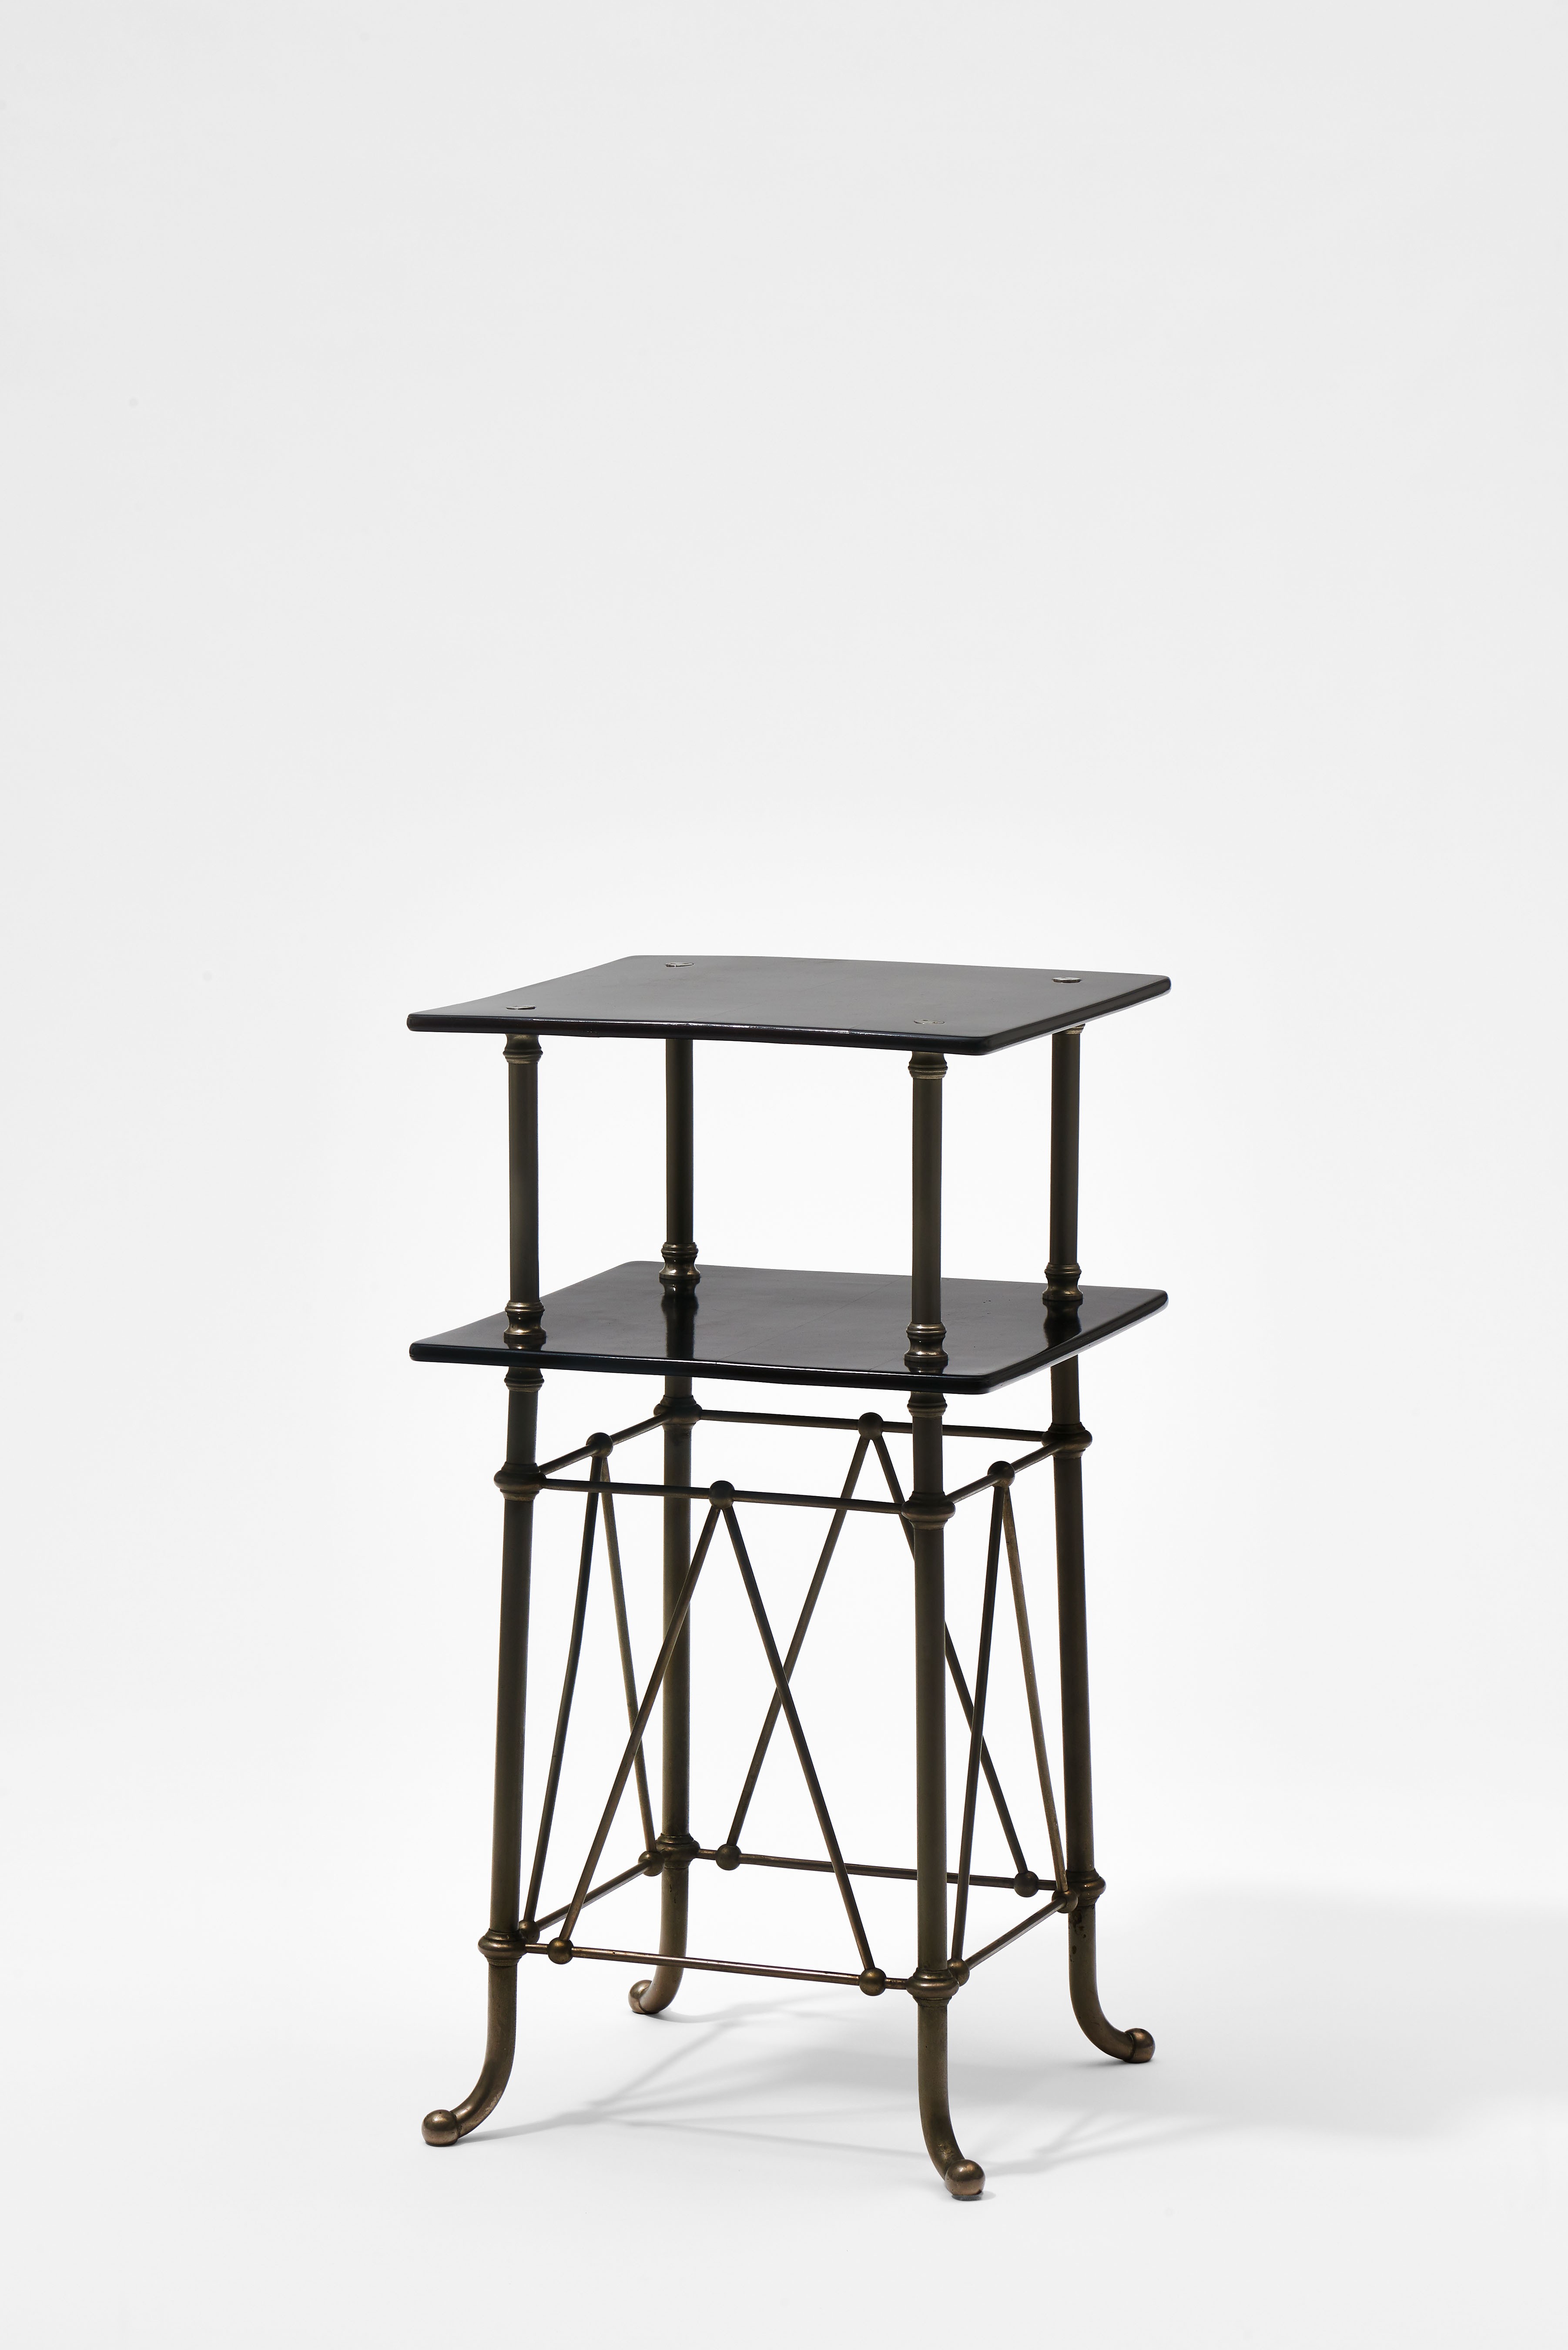 <BODY><div>Otto Wagner, Side table from his own apartment in Köstlergasse 3, Vienna’s 6th district, 1898</div><div>© MAK/Georg Mayer</div></BODY>